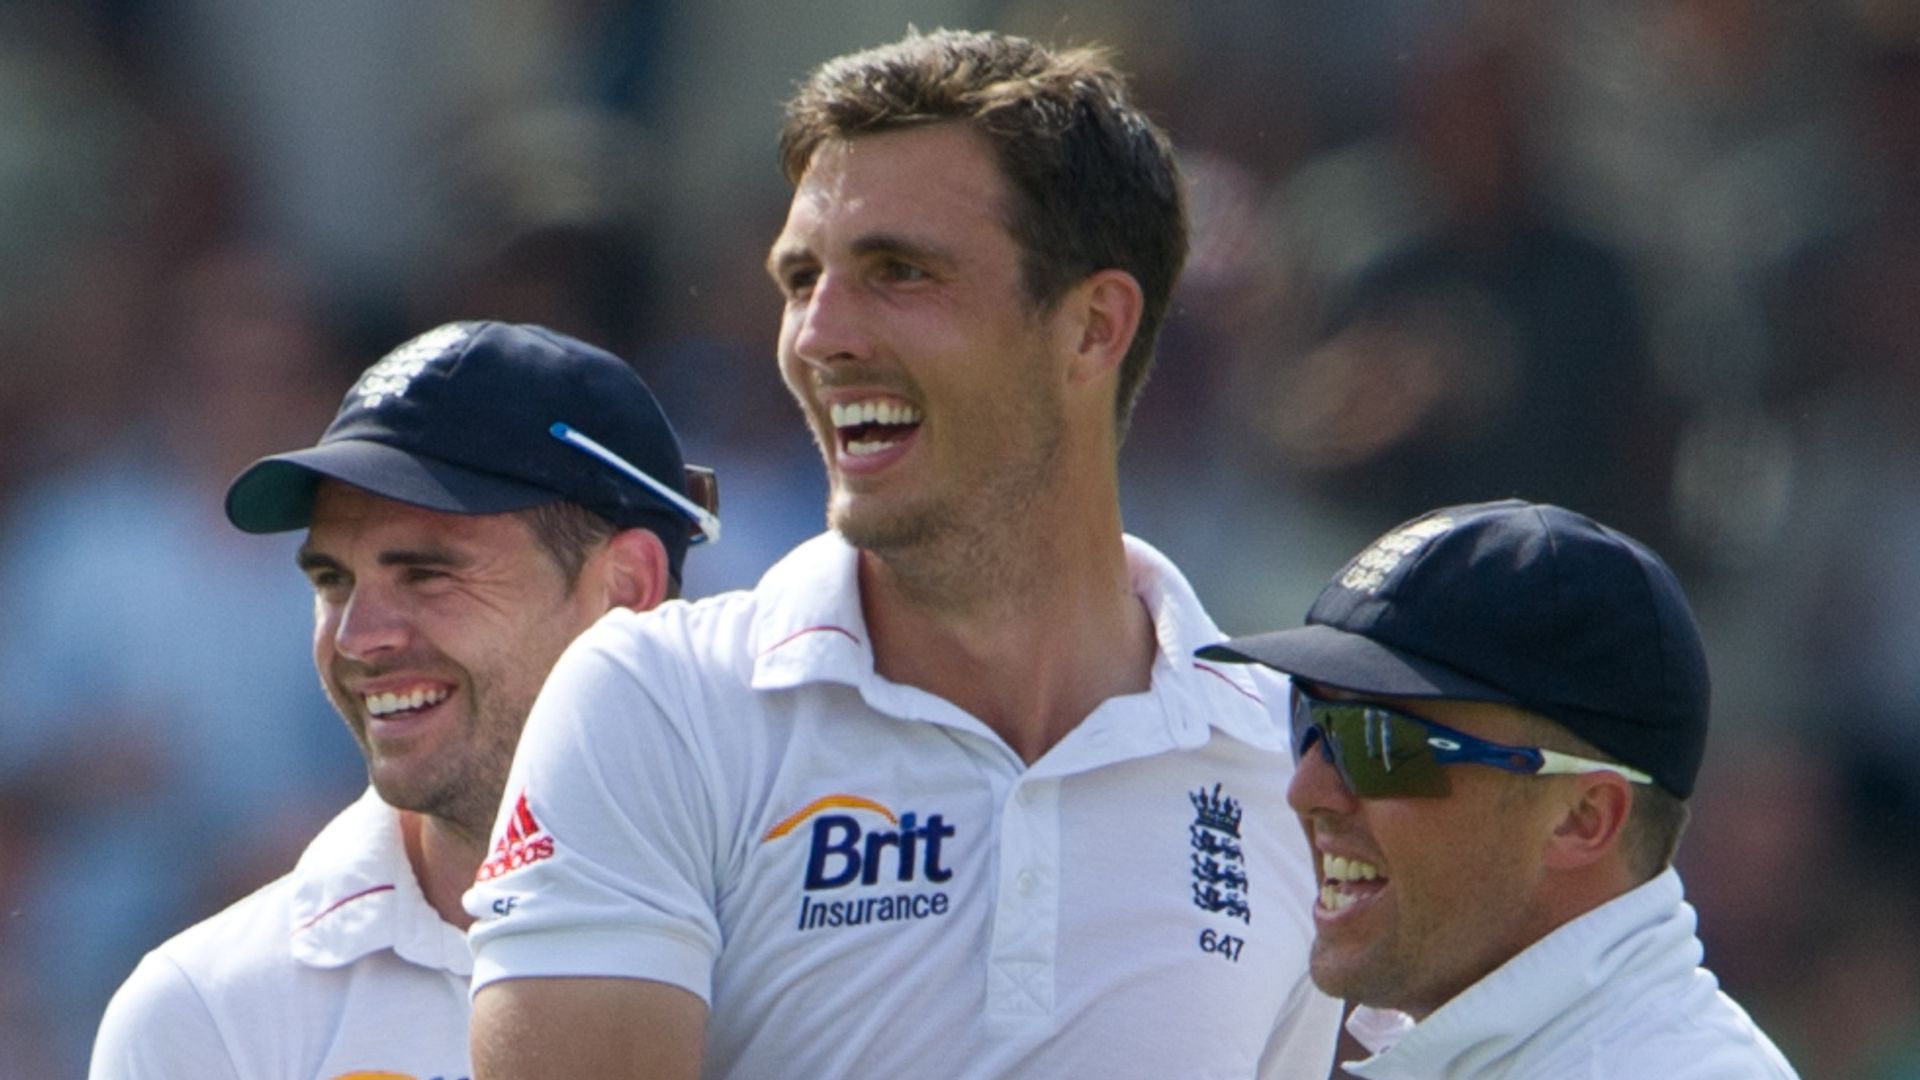 Finn: England's tour of India will be their toughest challenge yet